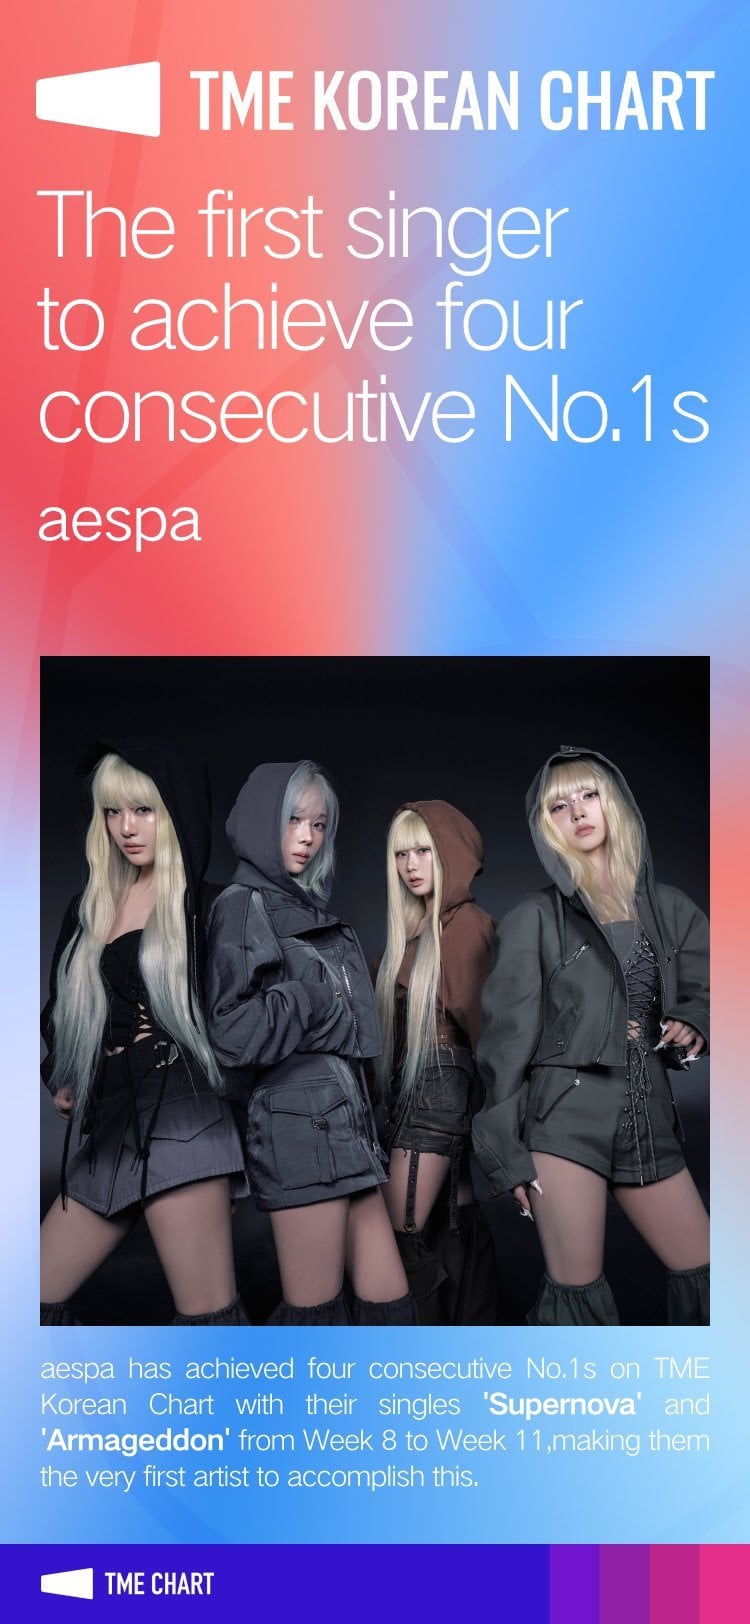 240612 aespa becomes the first artist to achieve four consecutive No.1s on 'TME KOREAN CHART' with 'Supernova' & 'Armageddon'